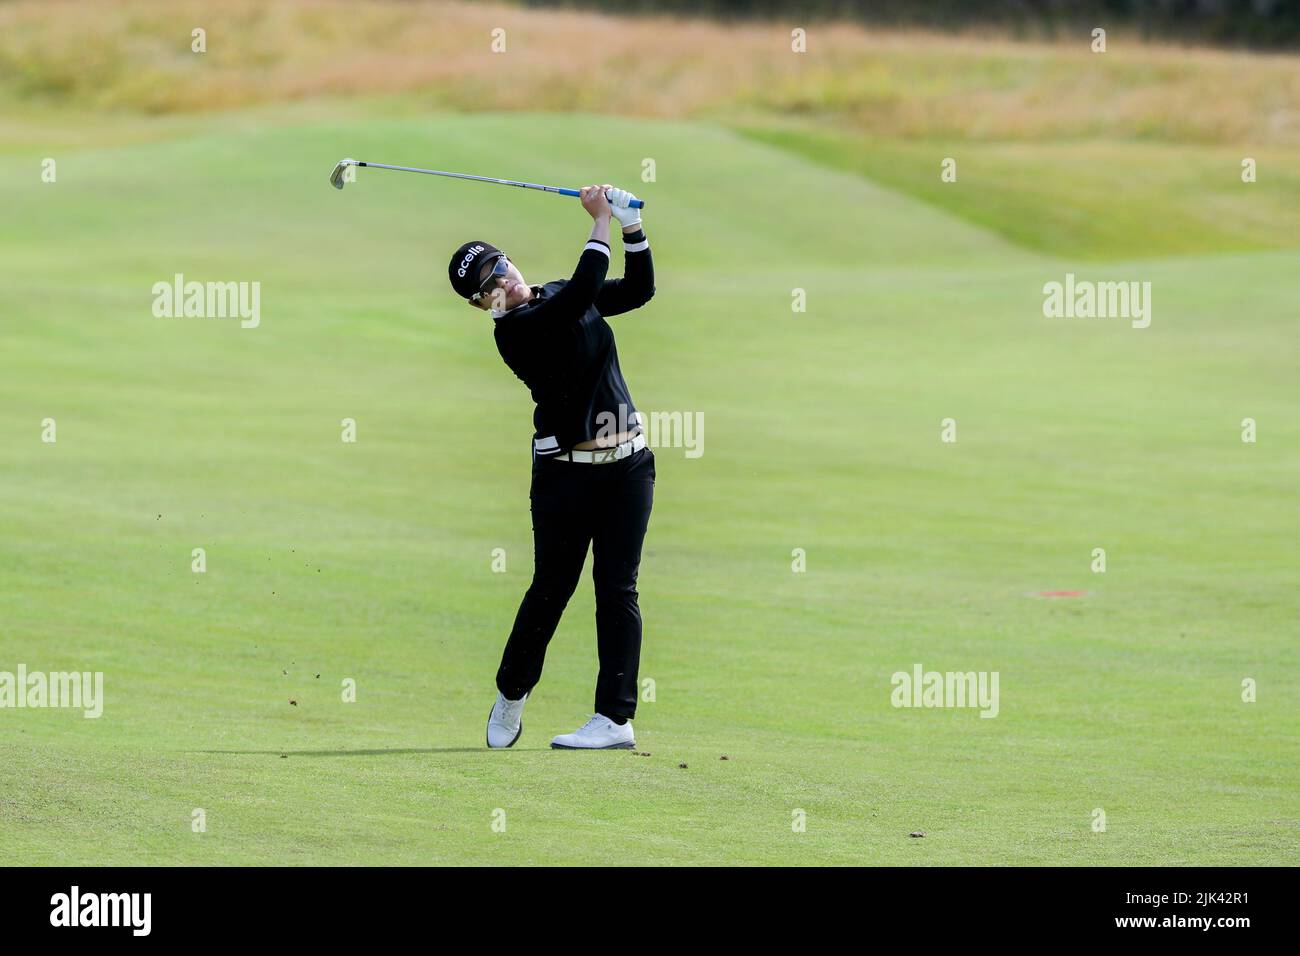 Irvine, UK. 30th July, 2022. The third round of the Trust Golf Women's Scottish Golf took place with 75 players making the cut. Heavy overnight rain from Friday into Saturday made for a softer and more testing course. Eun-Hee Ji playing her second shot on the 1th fairway, Credit: Findlay/Alamy Live News Stock Photo